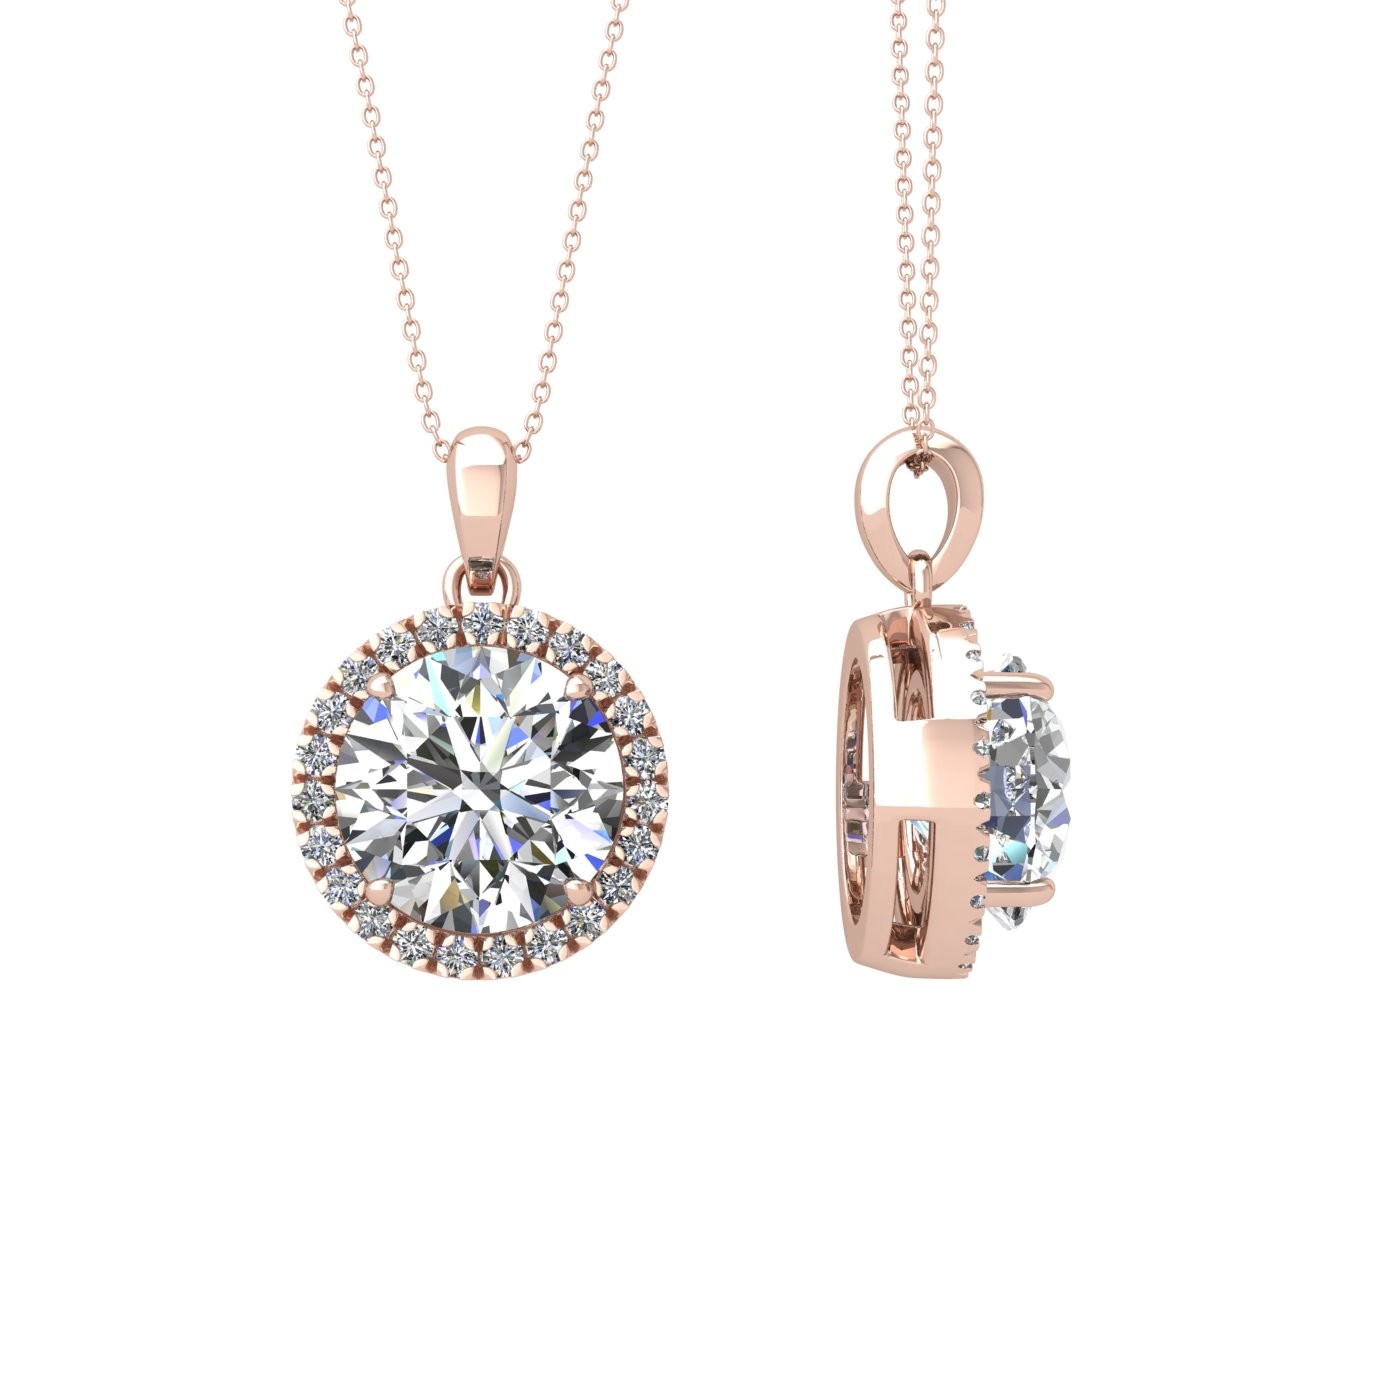 18k rose gold  0,3 ct 4 prong round shape diamond pendant with diamond pavÉ set halo including chain seperate from the pendant Photos & images